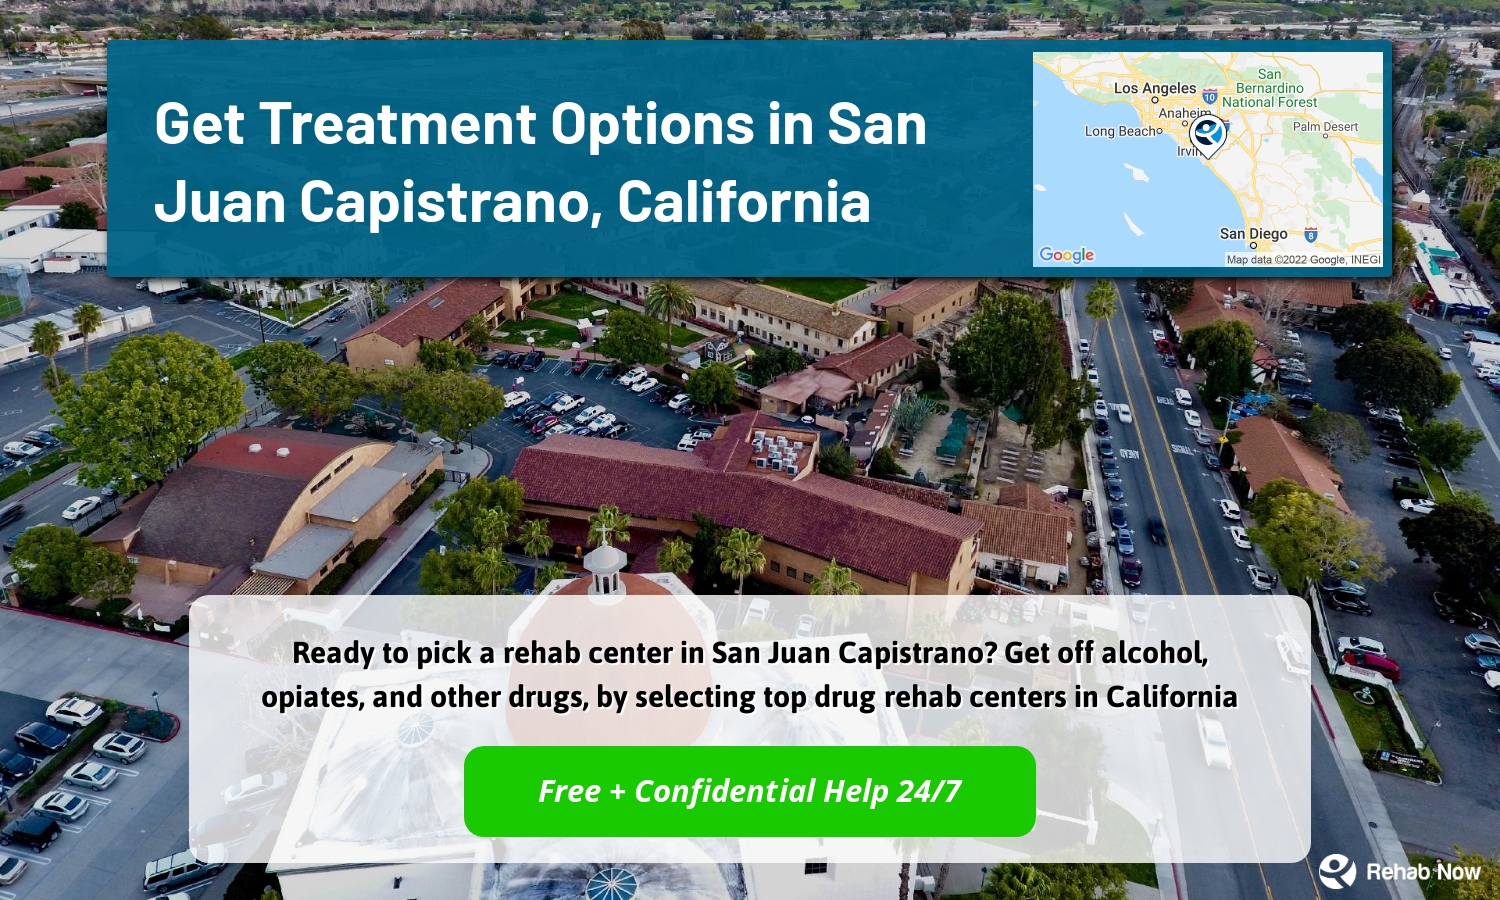 Ready to pick a rehab center in San Juan Capistrano? Get off alcohol, opiates, and other drugs, by selecting top drug rehab centers in California